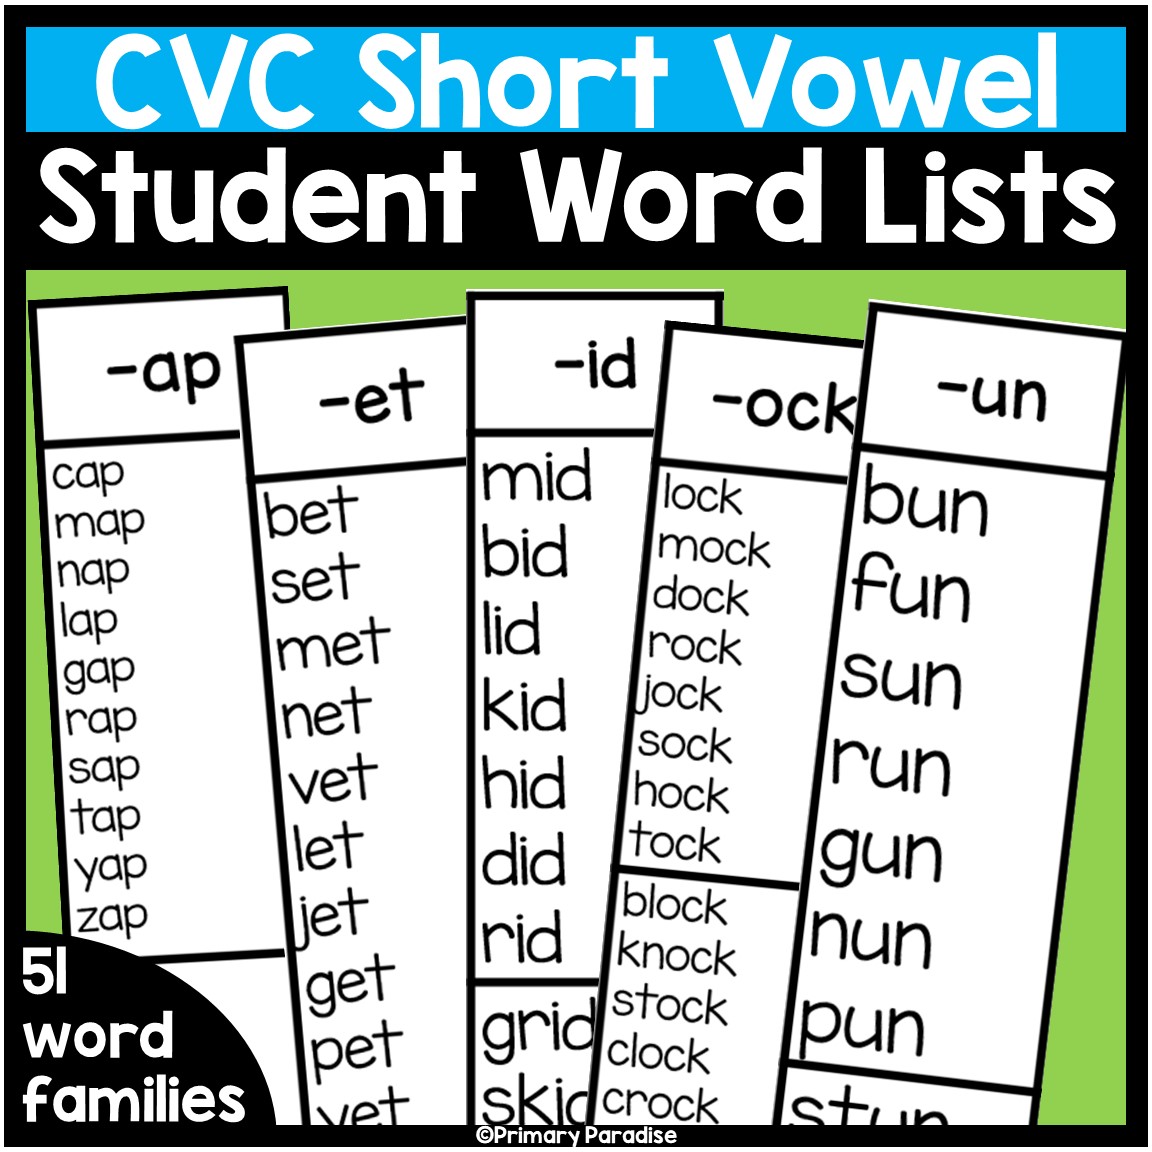 cvc-word-lists-for-students-printable-short-vowel-word-family